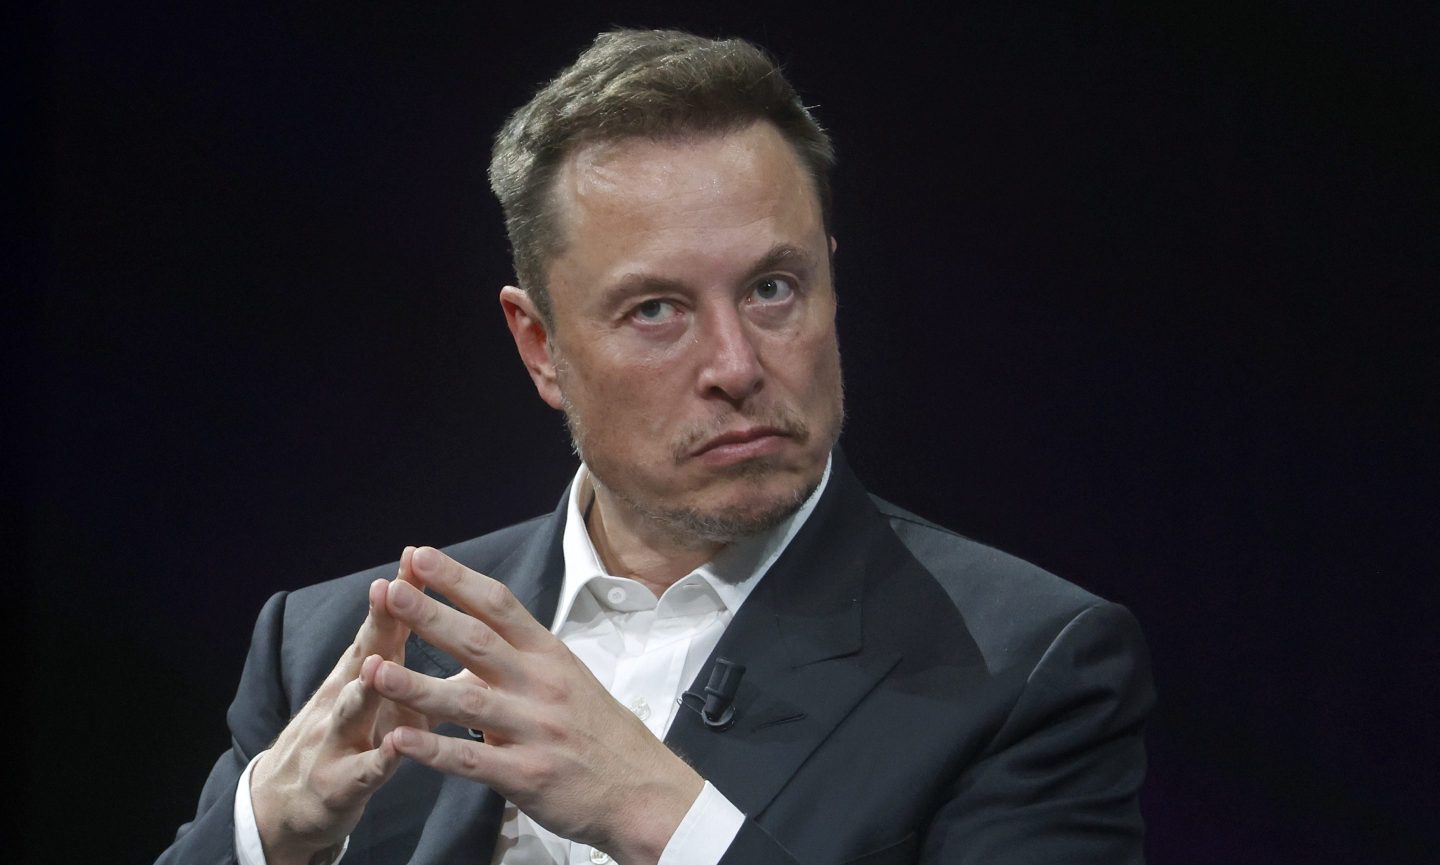 Twitter owner Elon Musk rebranded the company to X.